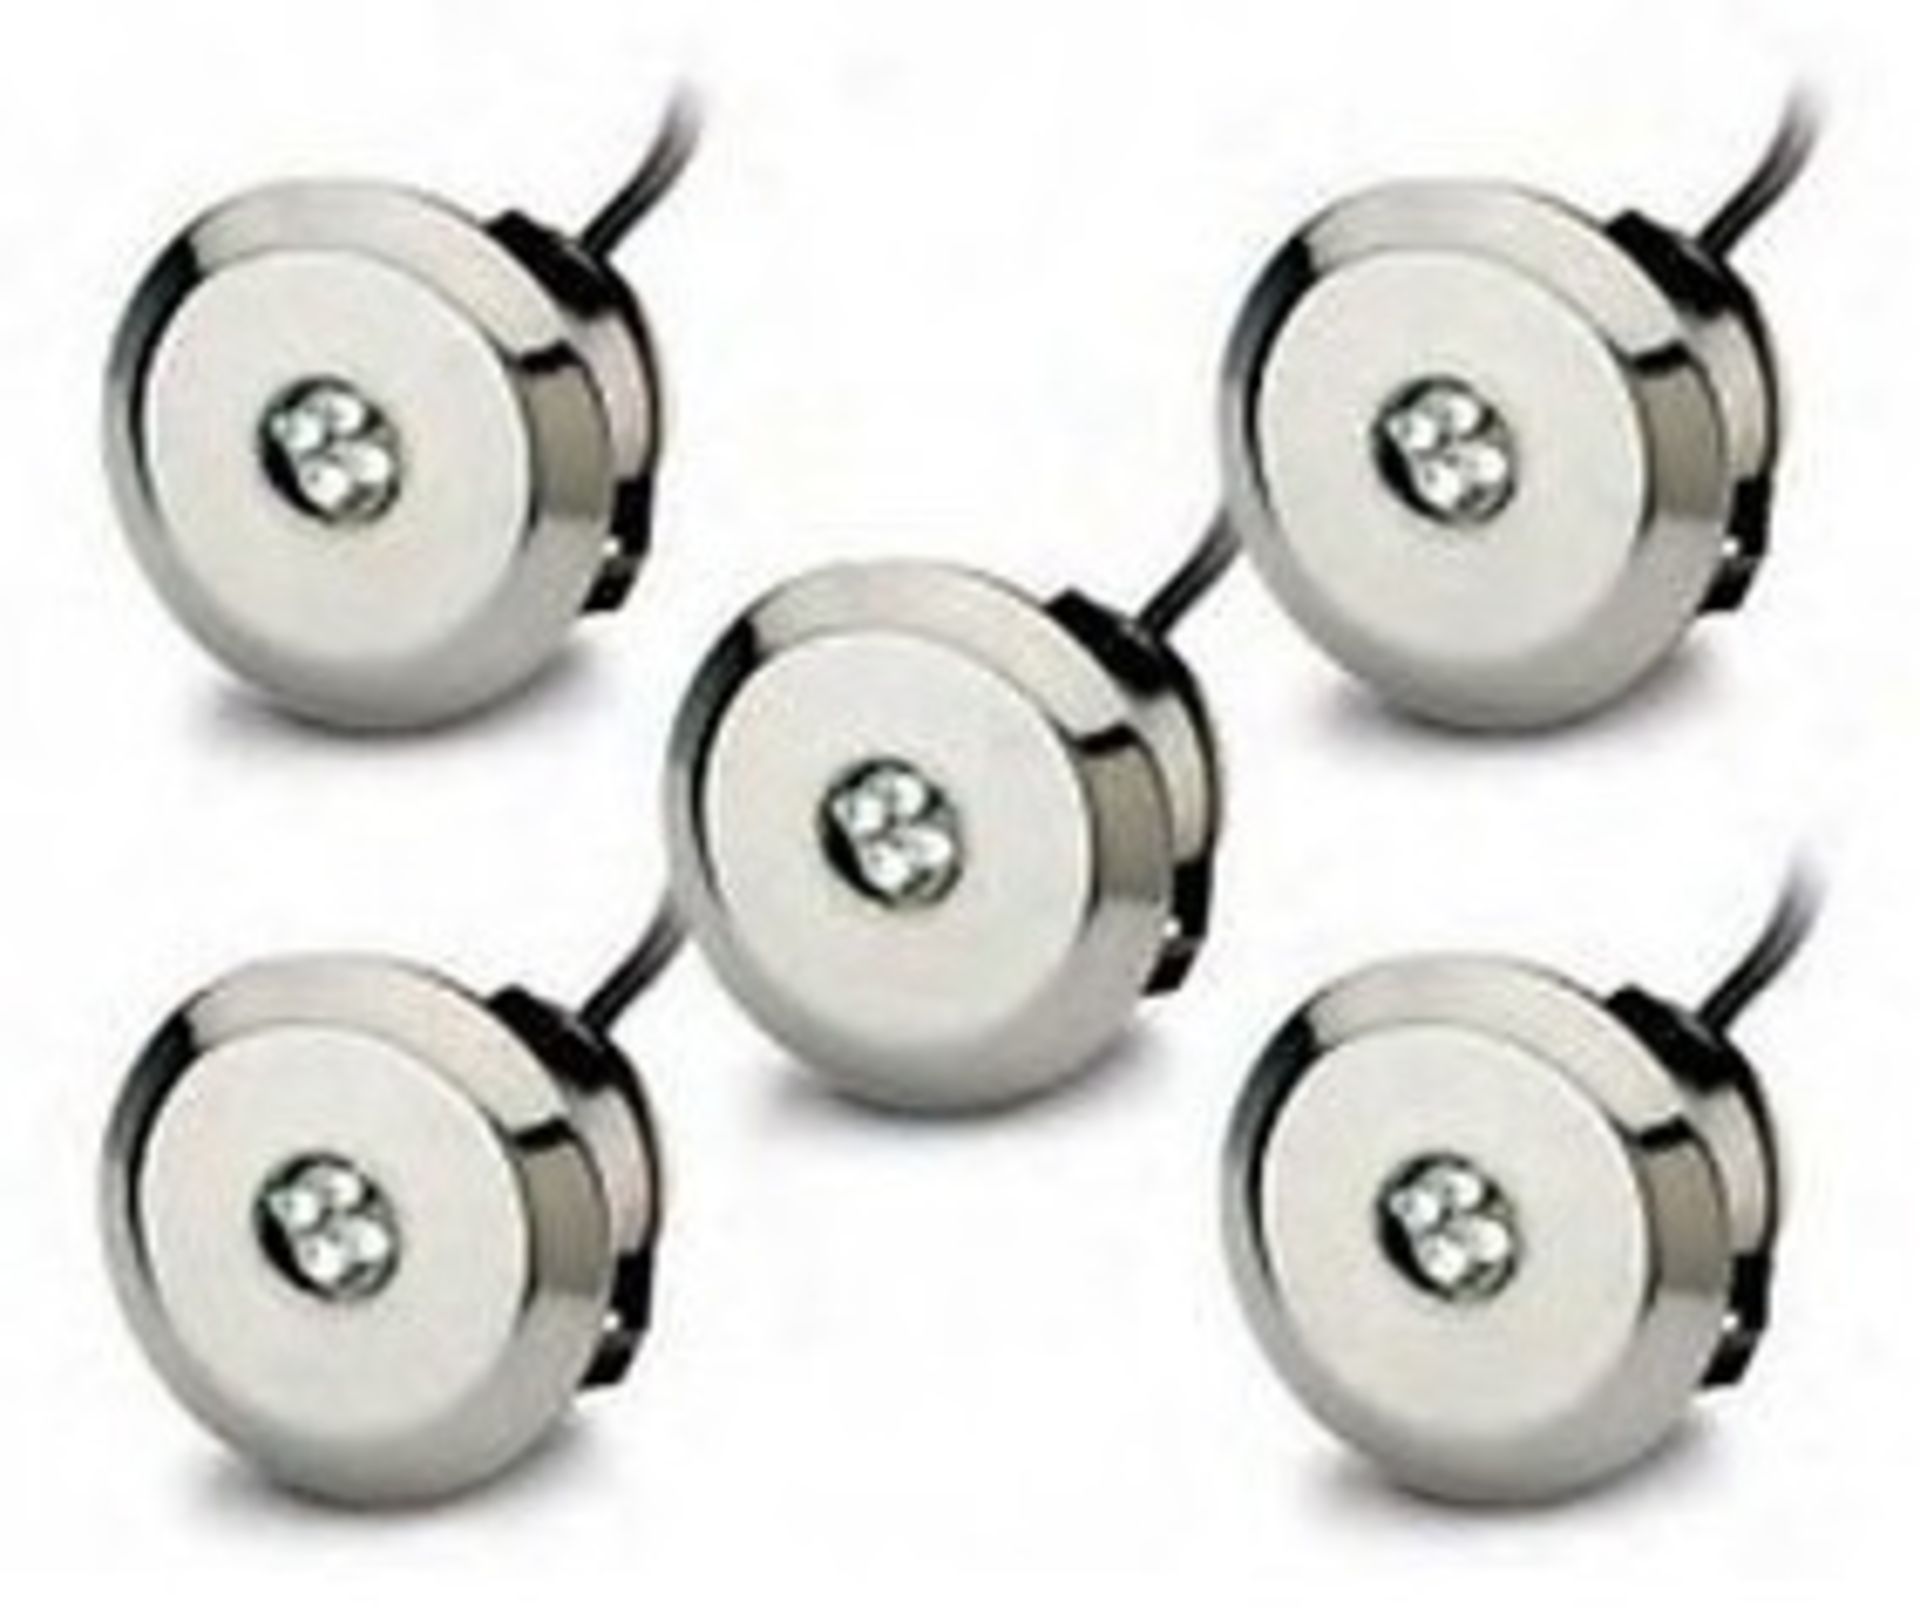 4 x JCC Lighting ELTINO Indoor Blue LED Floor or Wall Lighting Kits - Lot Includes Four Sets - Ideal - Image 5 of 6